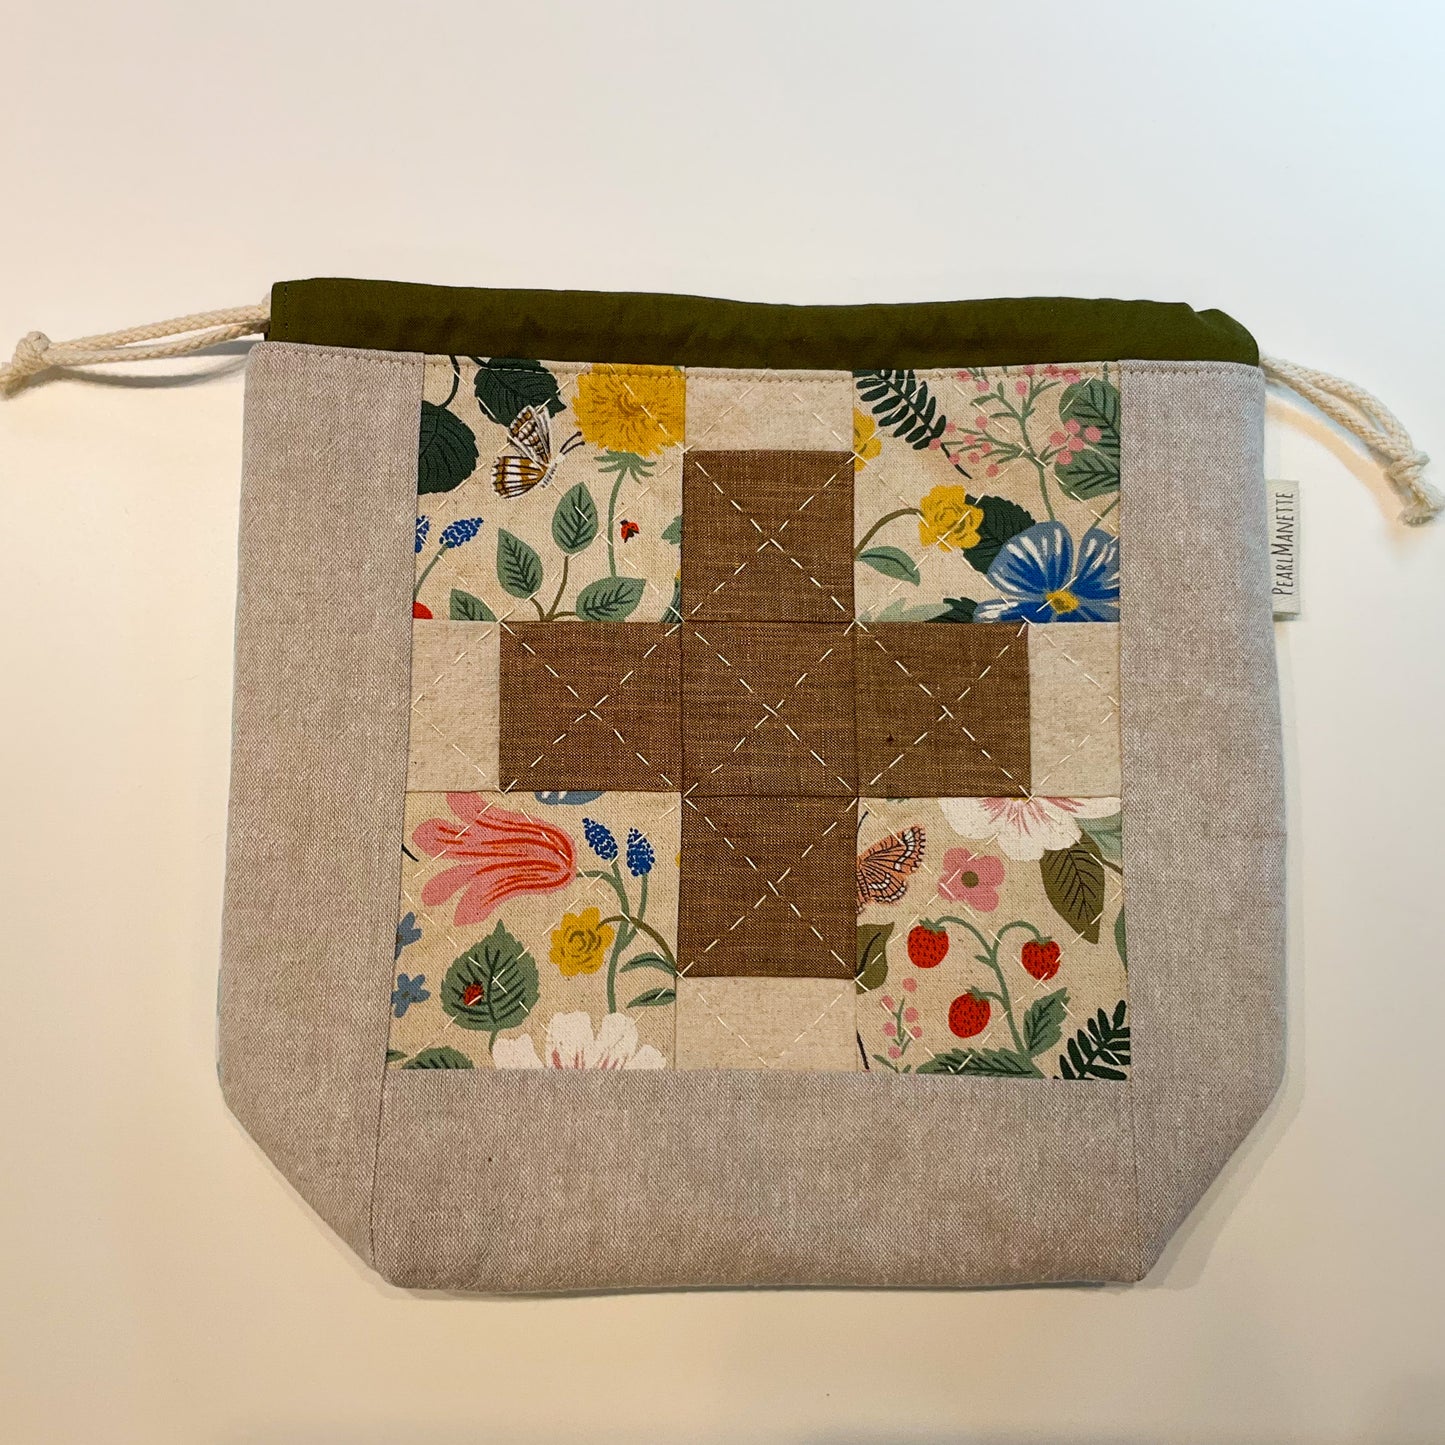 Hand Quilted "Patchwork Plus" Drawstring Bag